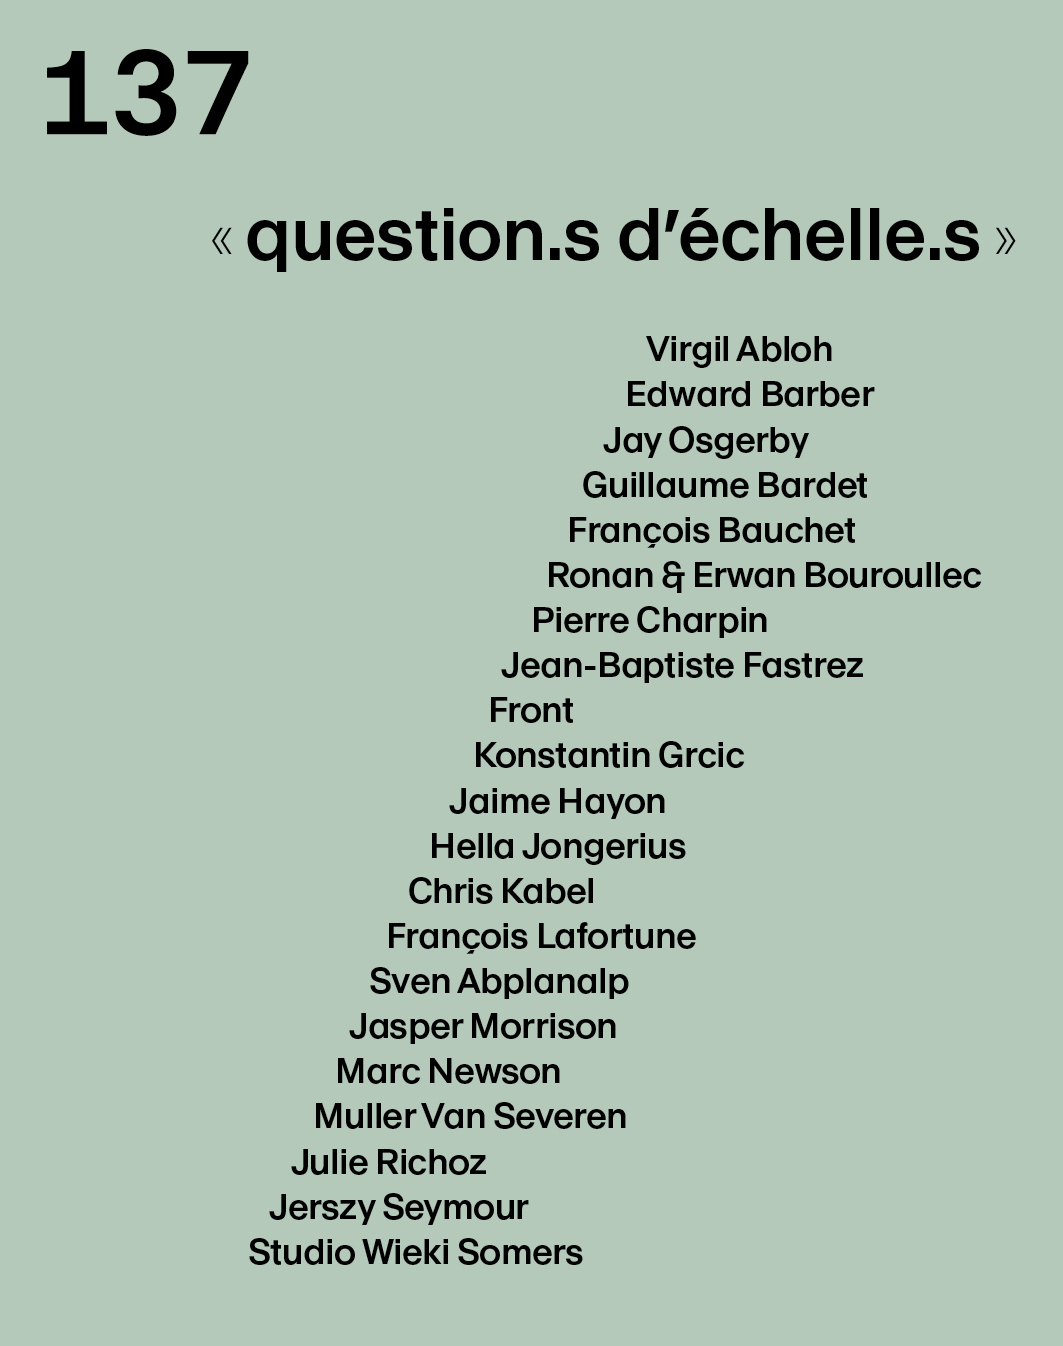 Edward Barber and Jay Osgerby - question.s d'échelle.s